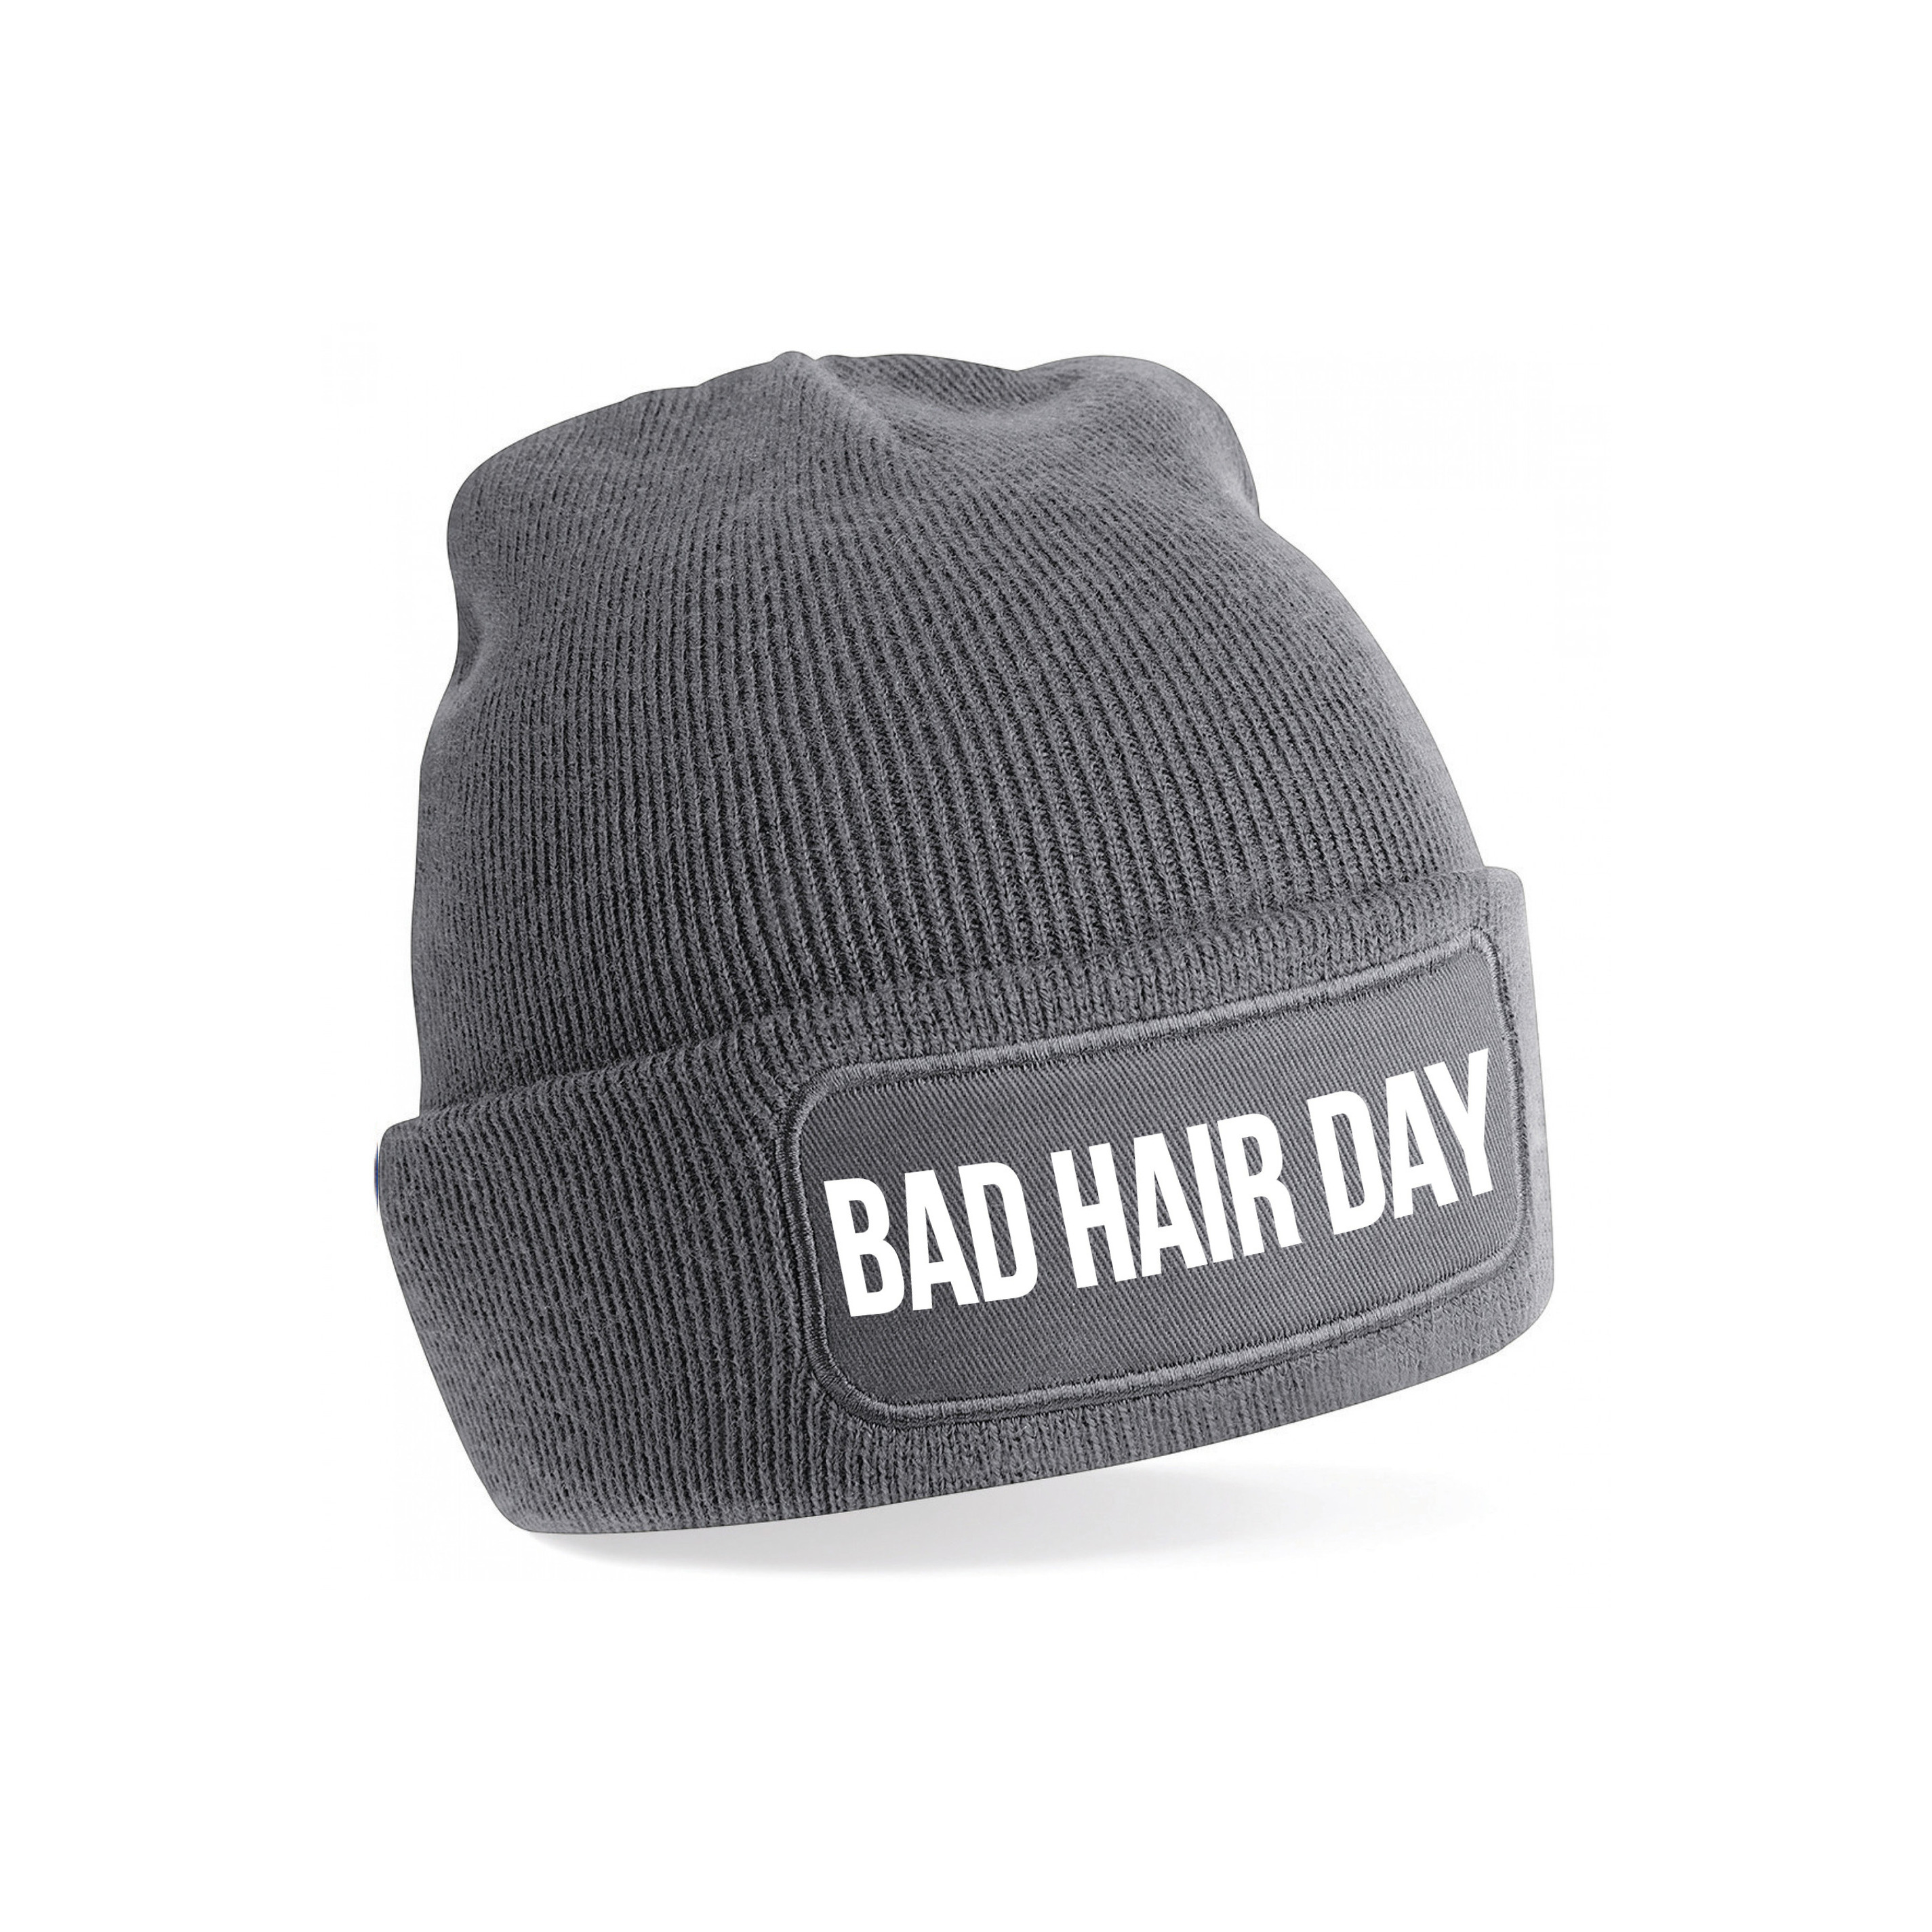 Bad hair day muts unisex one size Grijs